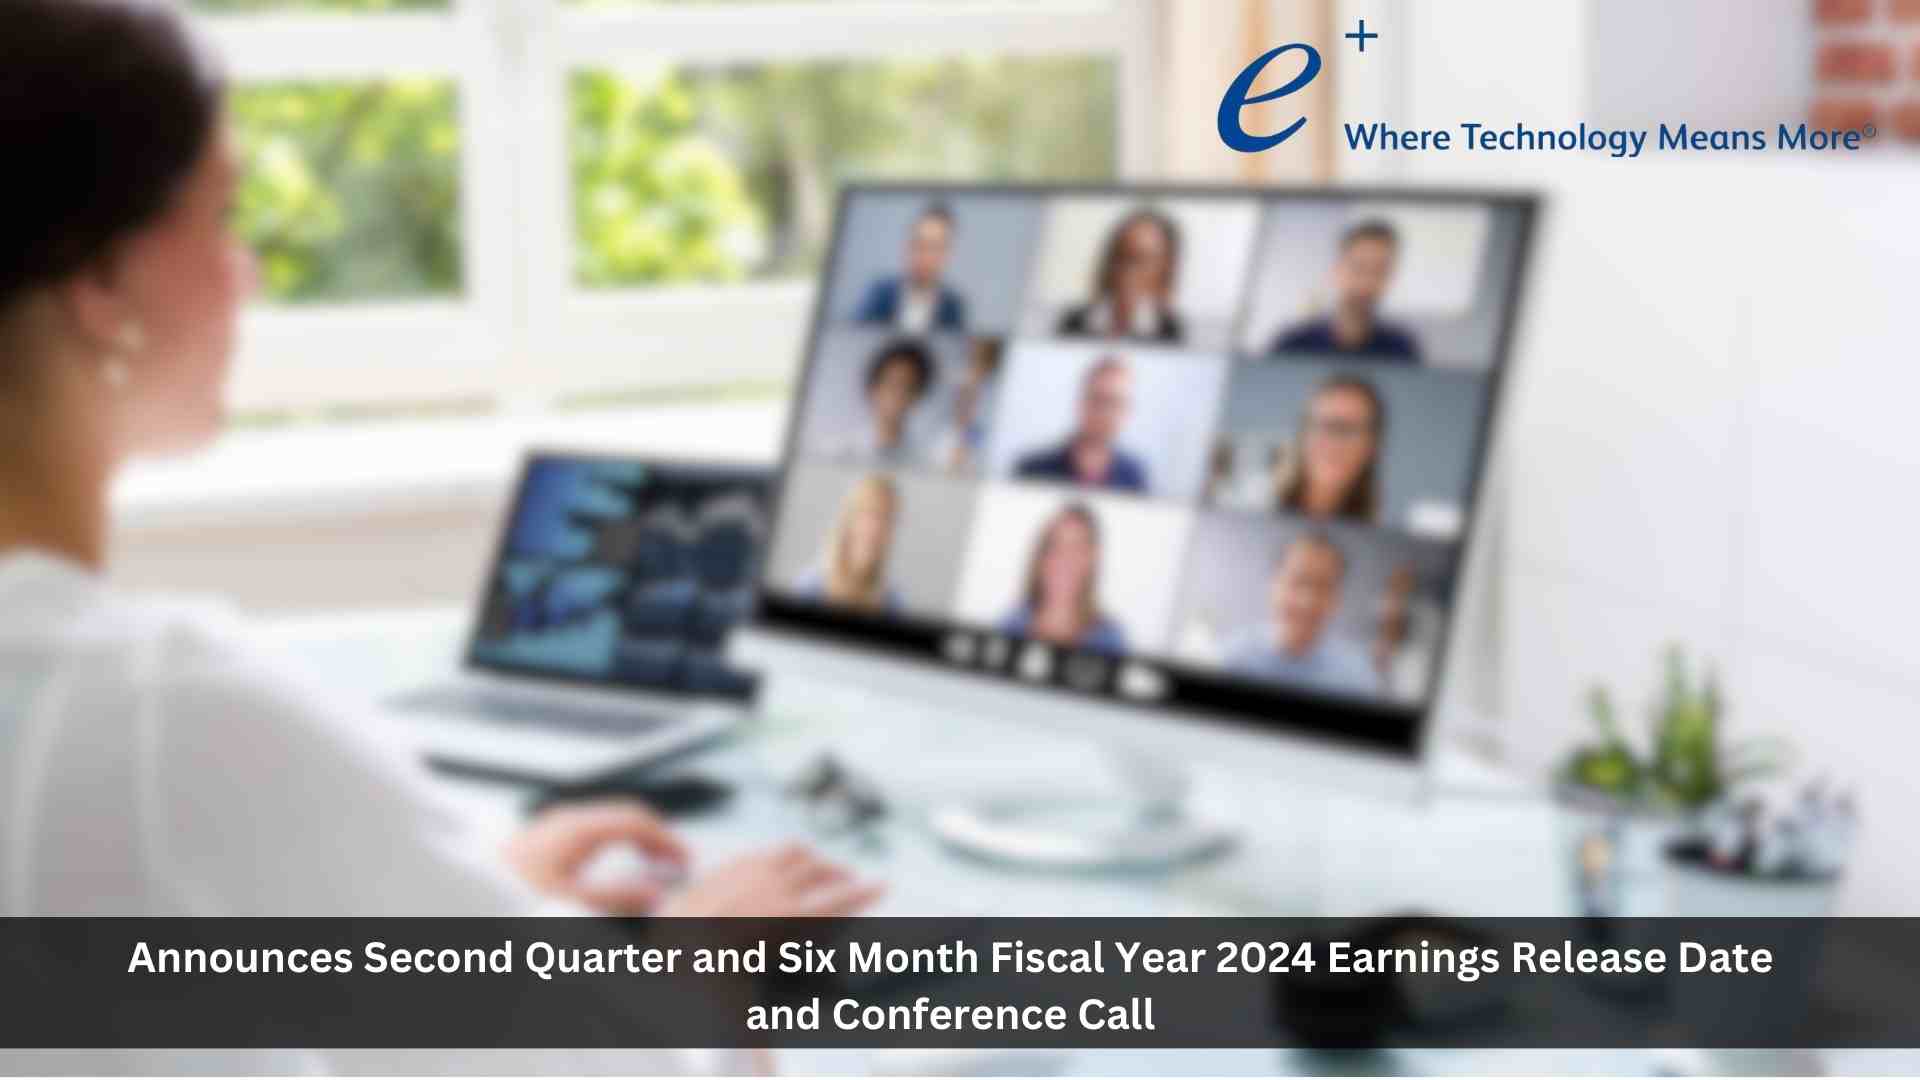 ePlus Announces Second Quarter and Six Month Fiscal Year 2024 Earnings